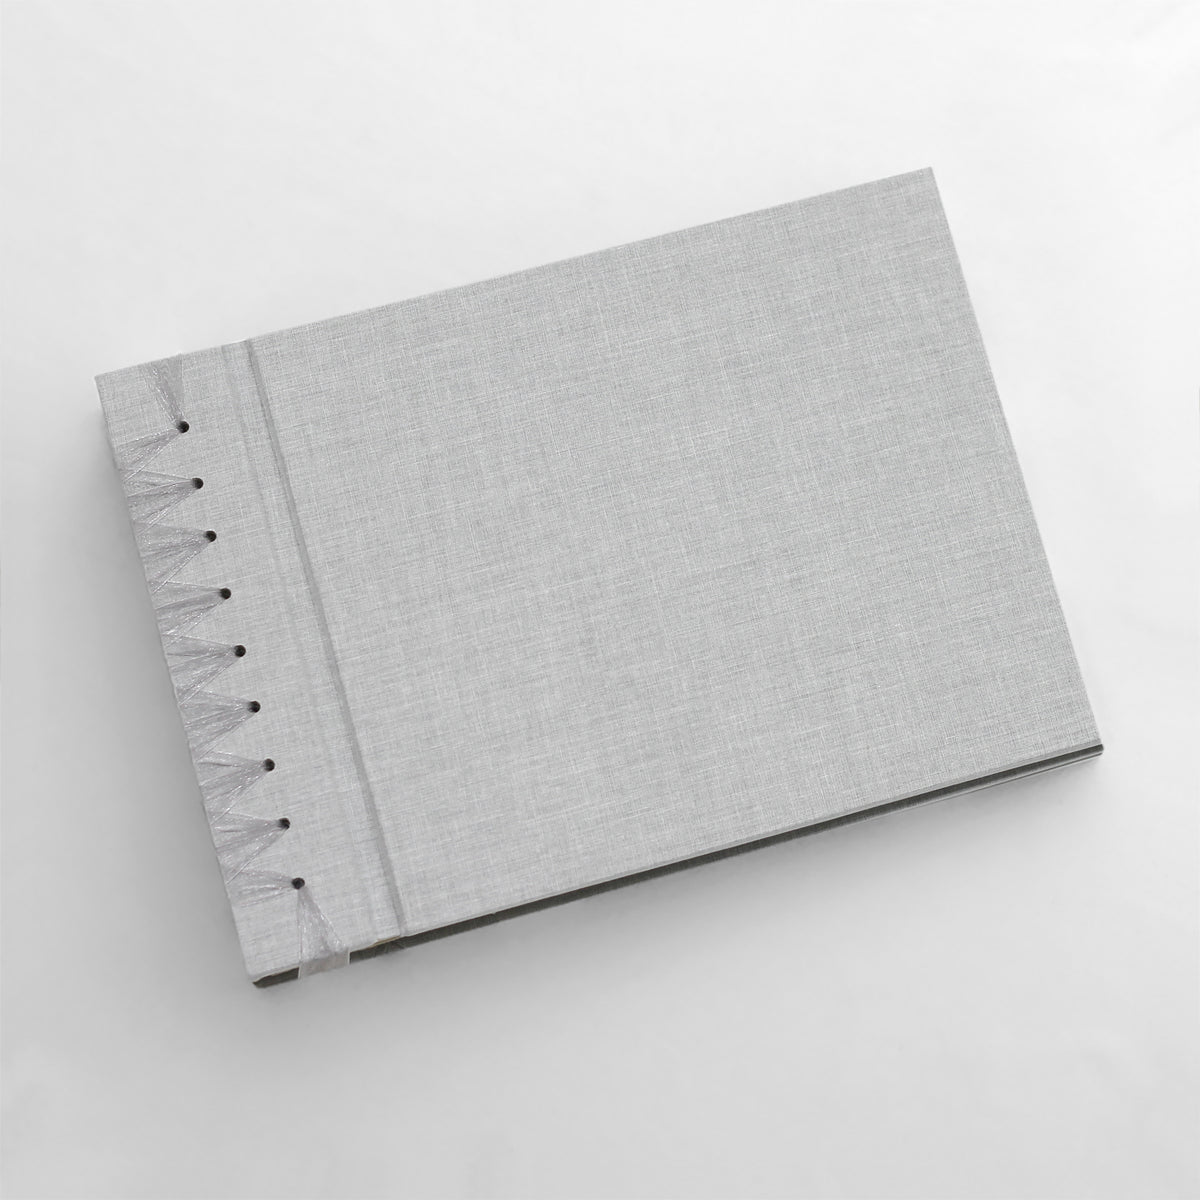 Large 10 x 15 Paper Page Album | Cover: Dove Gray Linen | Available Personalized